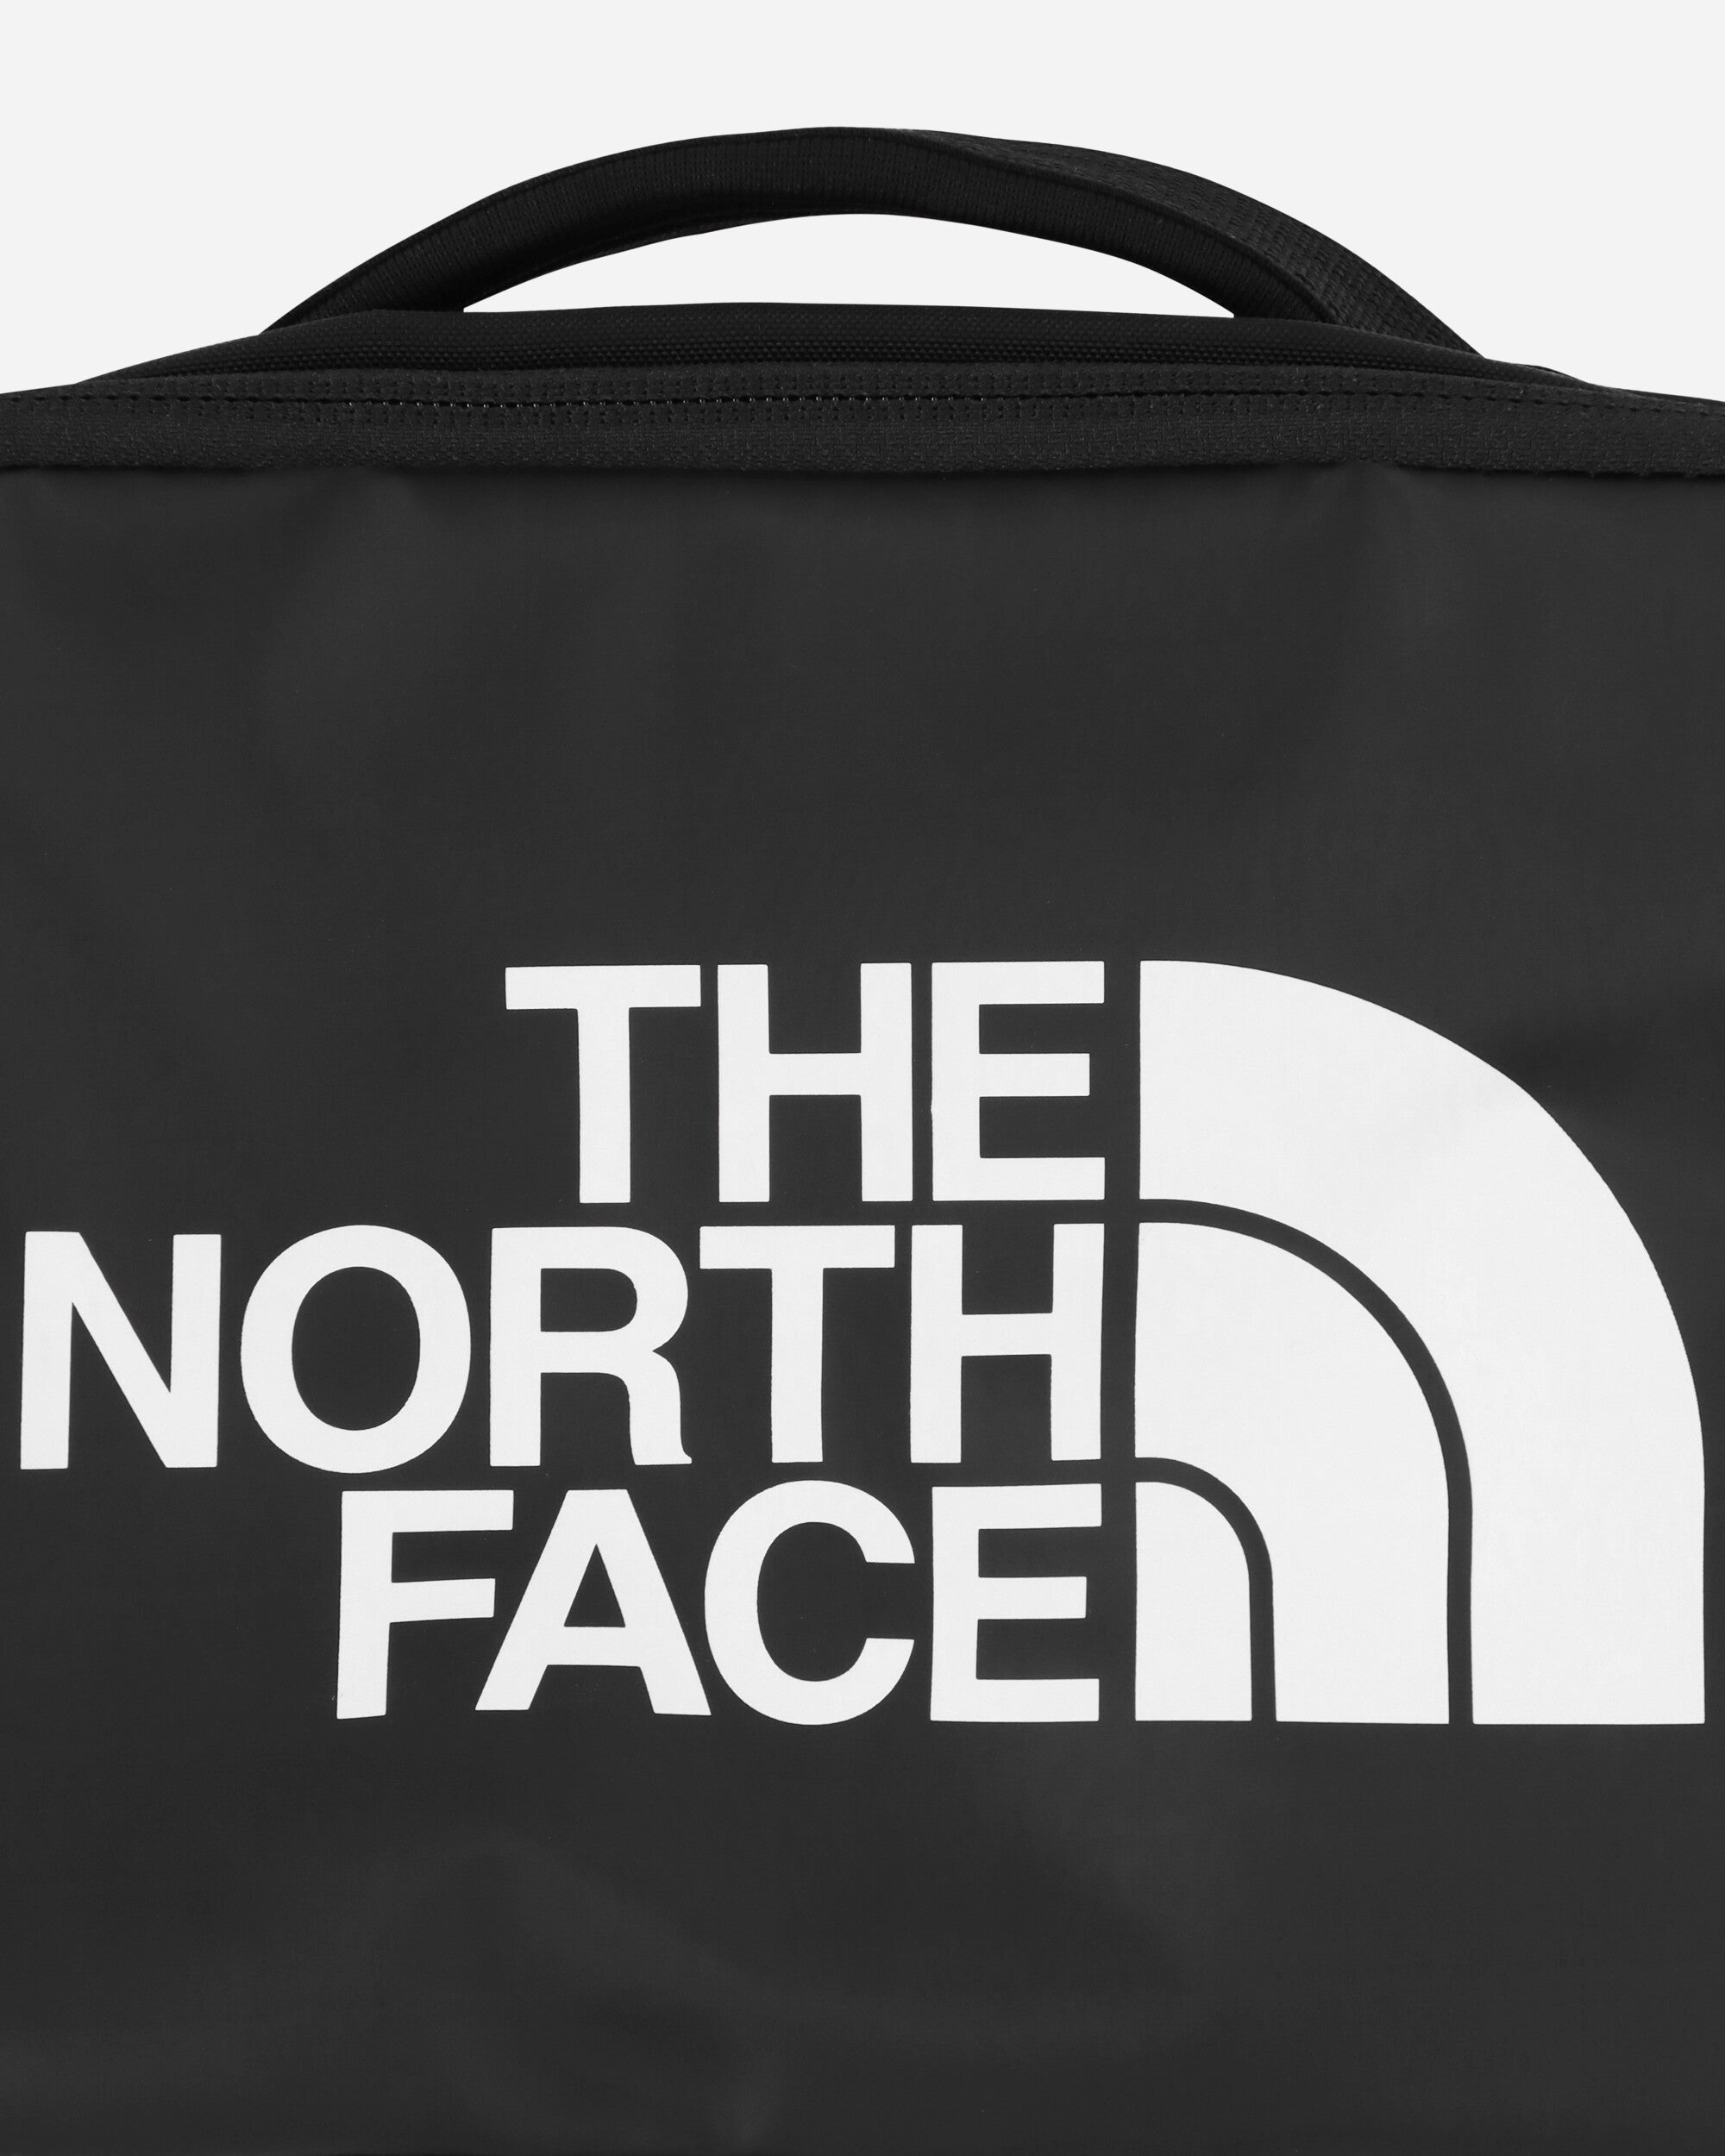 The North Face Base Camp Voyager Dopp Kit Tnf Black/Tnf Wht Bags and Backpacks Travel bags NF0A81BL KY41